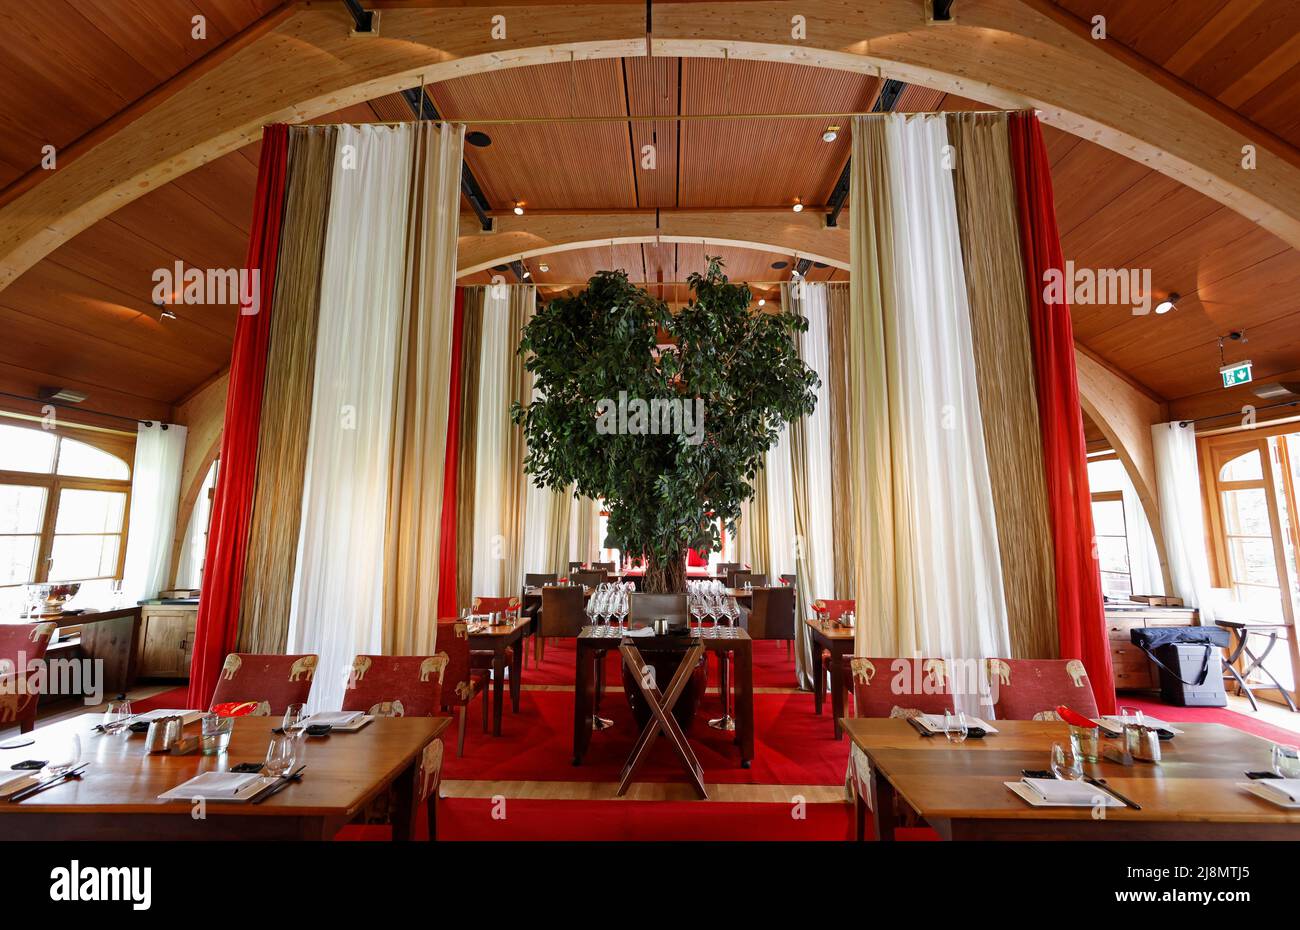 A general view shows the restaurant Fidelio in the hotel Castle Elmau, where the G7 Summit will be held in June 2022, in Kruen, near the southern Bavarian resort of Garmisch-Partenkirchen, Germany, May 17, 2022. REUTERS/Michaela Rehle Stock Photo